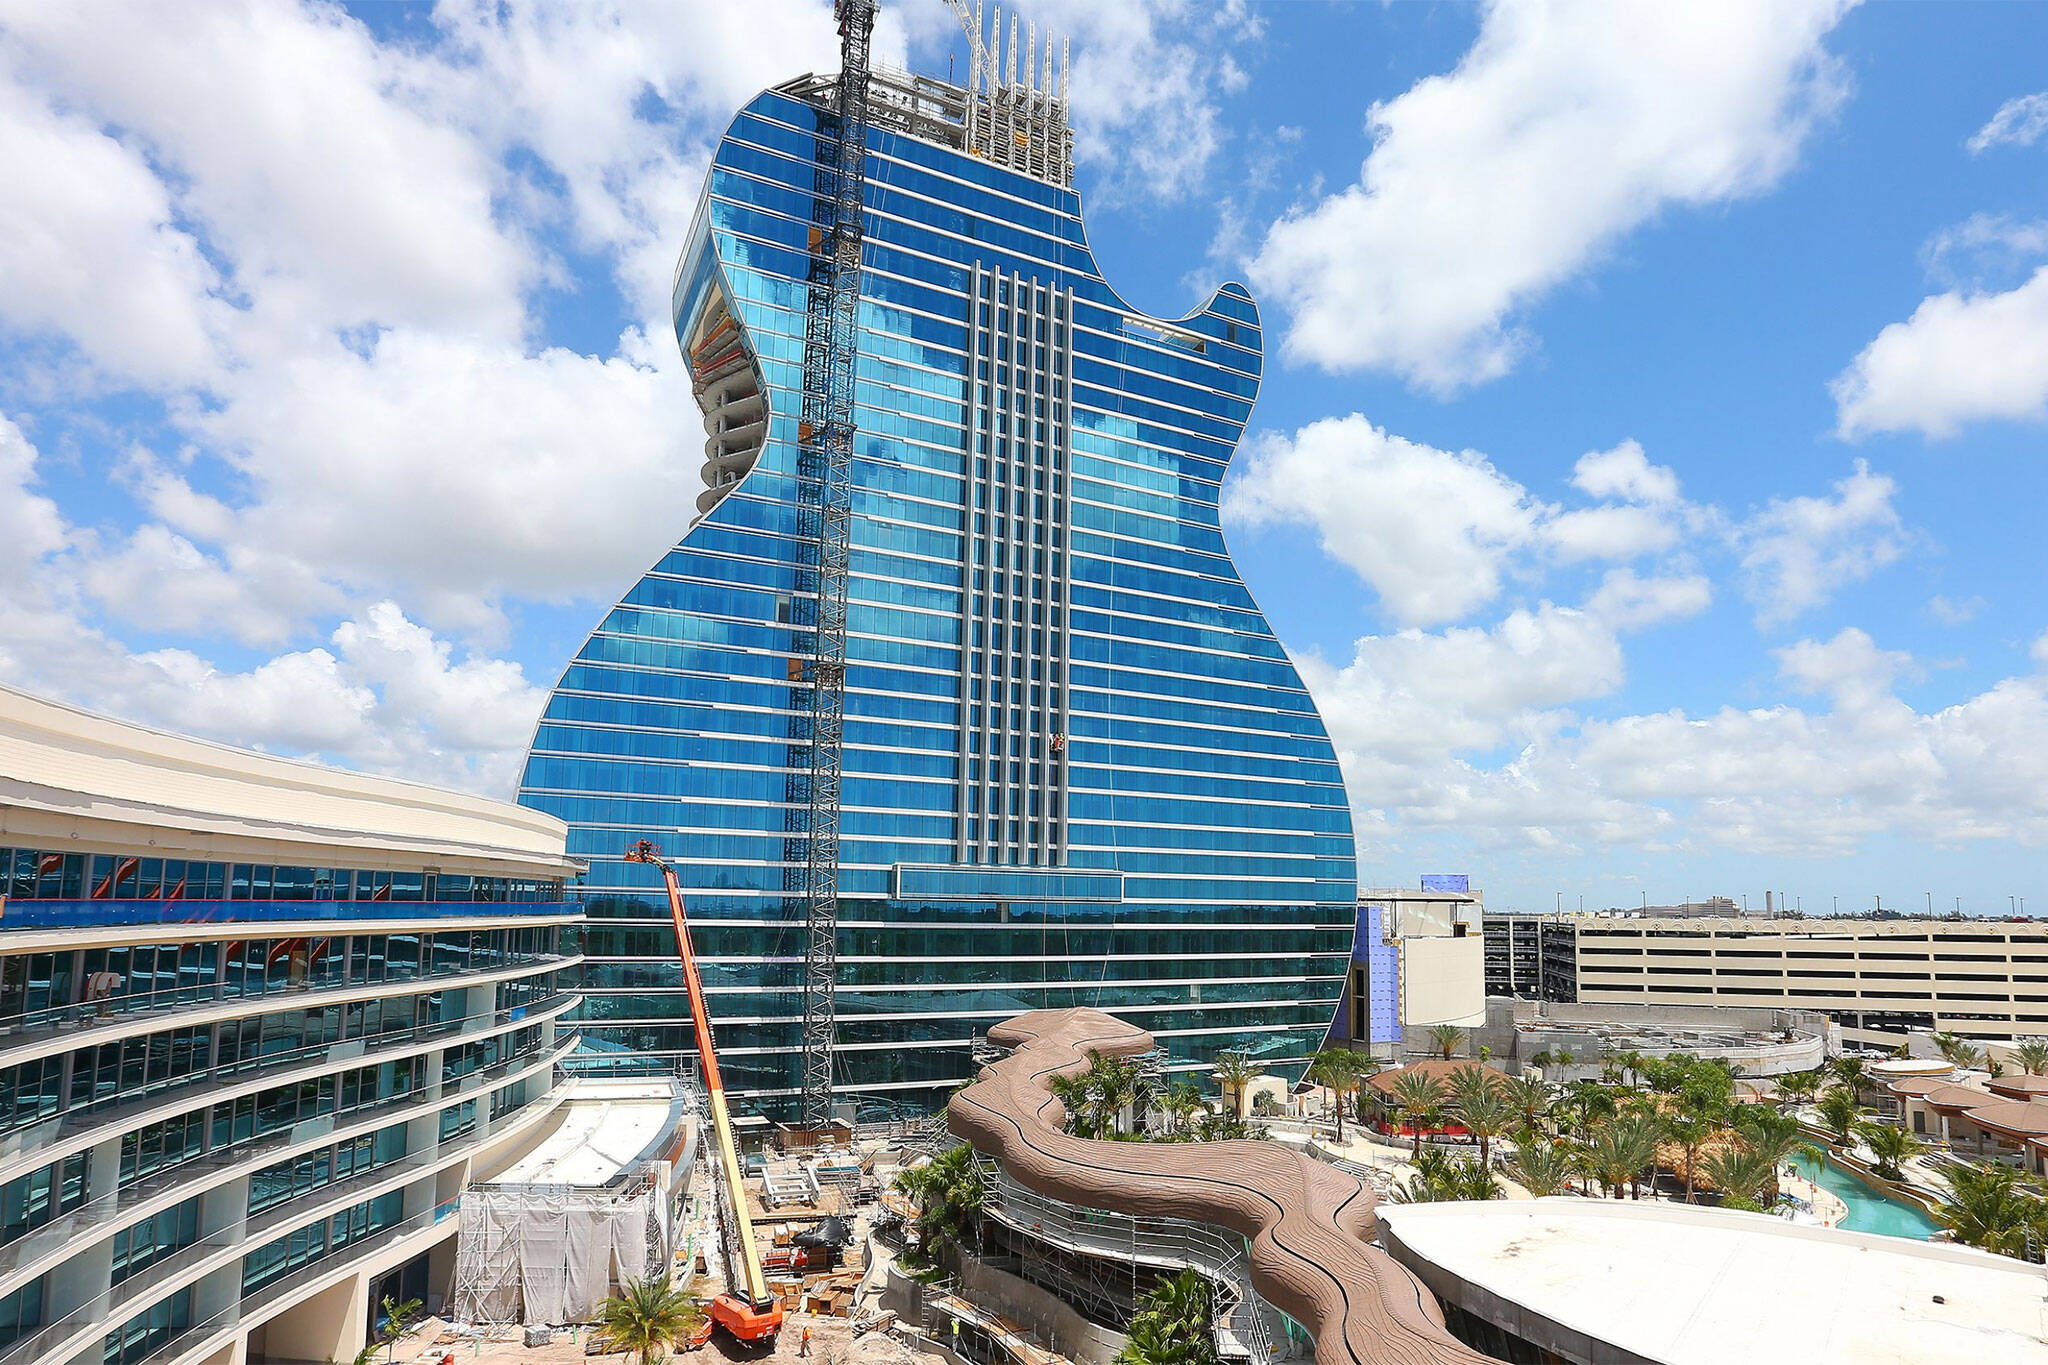 Canada's first Hard Rock Cafe Hotel and Casino is opening in Ontario